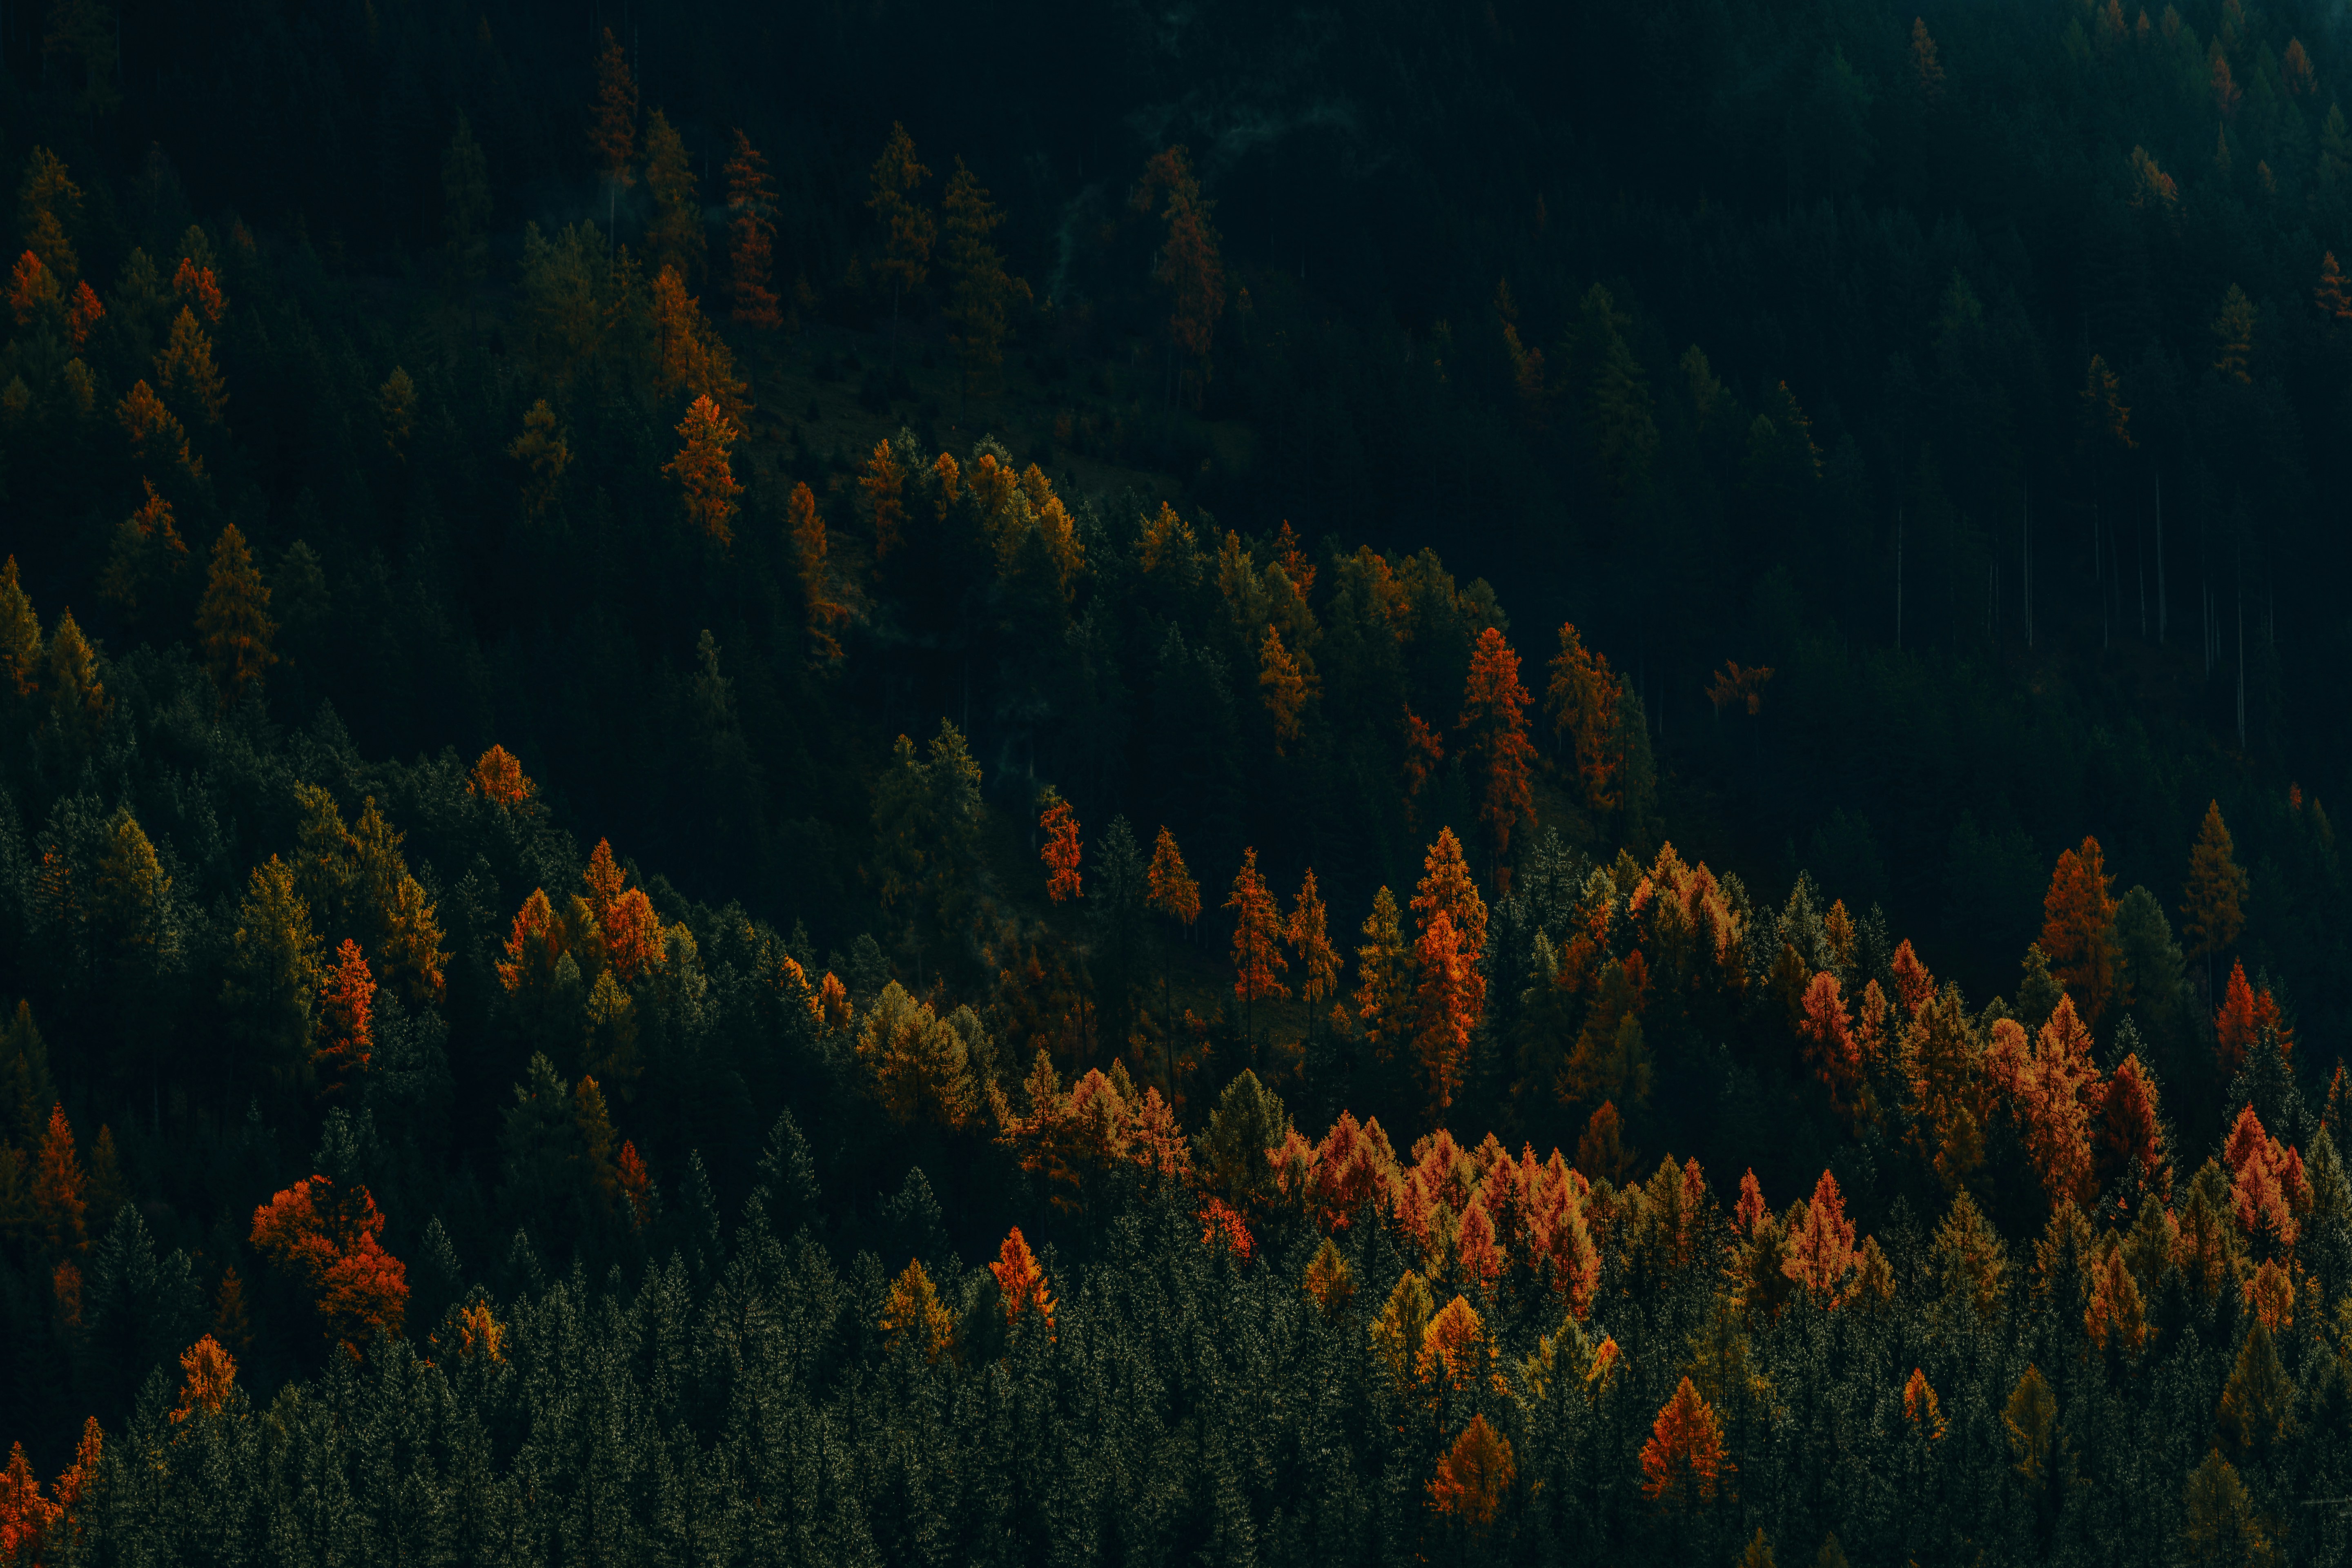 General 5760x3840 nature landscape trees forest fall high contrast Larch pine trees drone photo aerial view